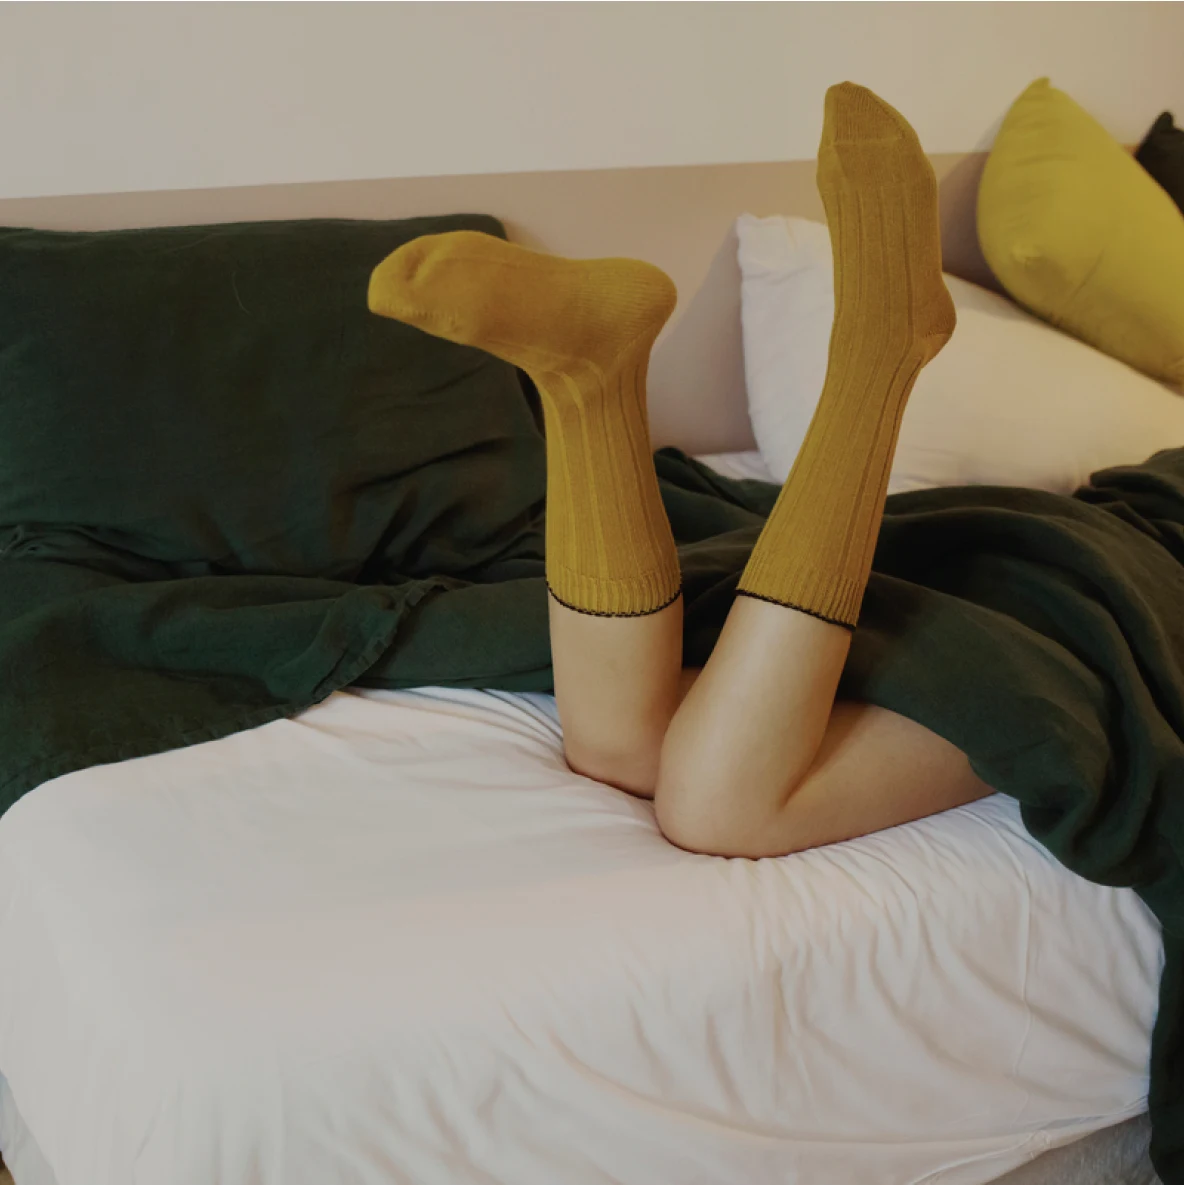 A shot of a woman’s legs wearing mustard-coloured socks on a bed with assorted pillows, covered in a green blanket.